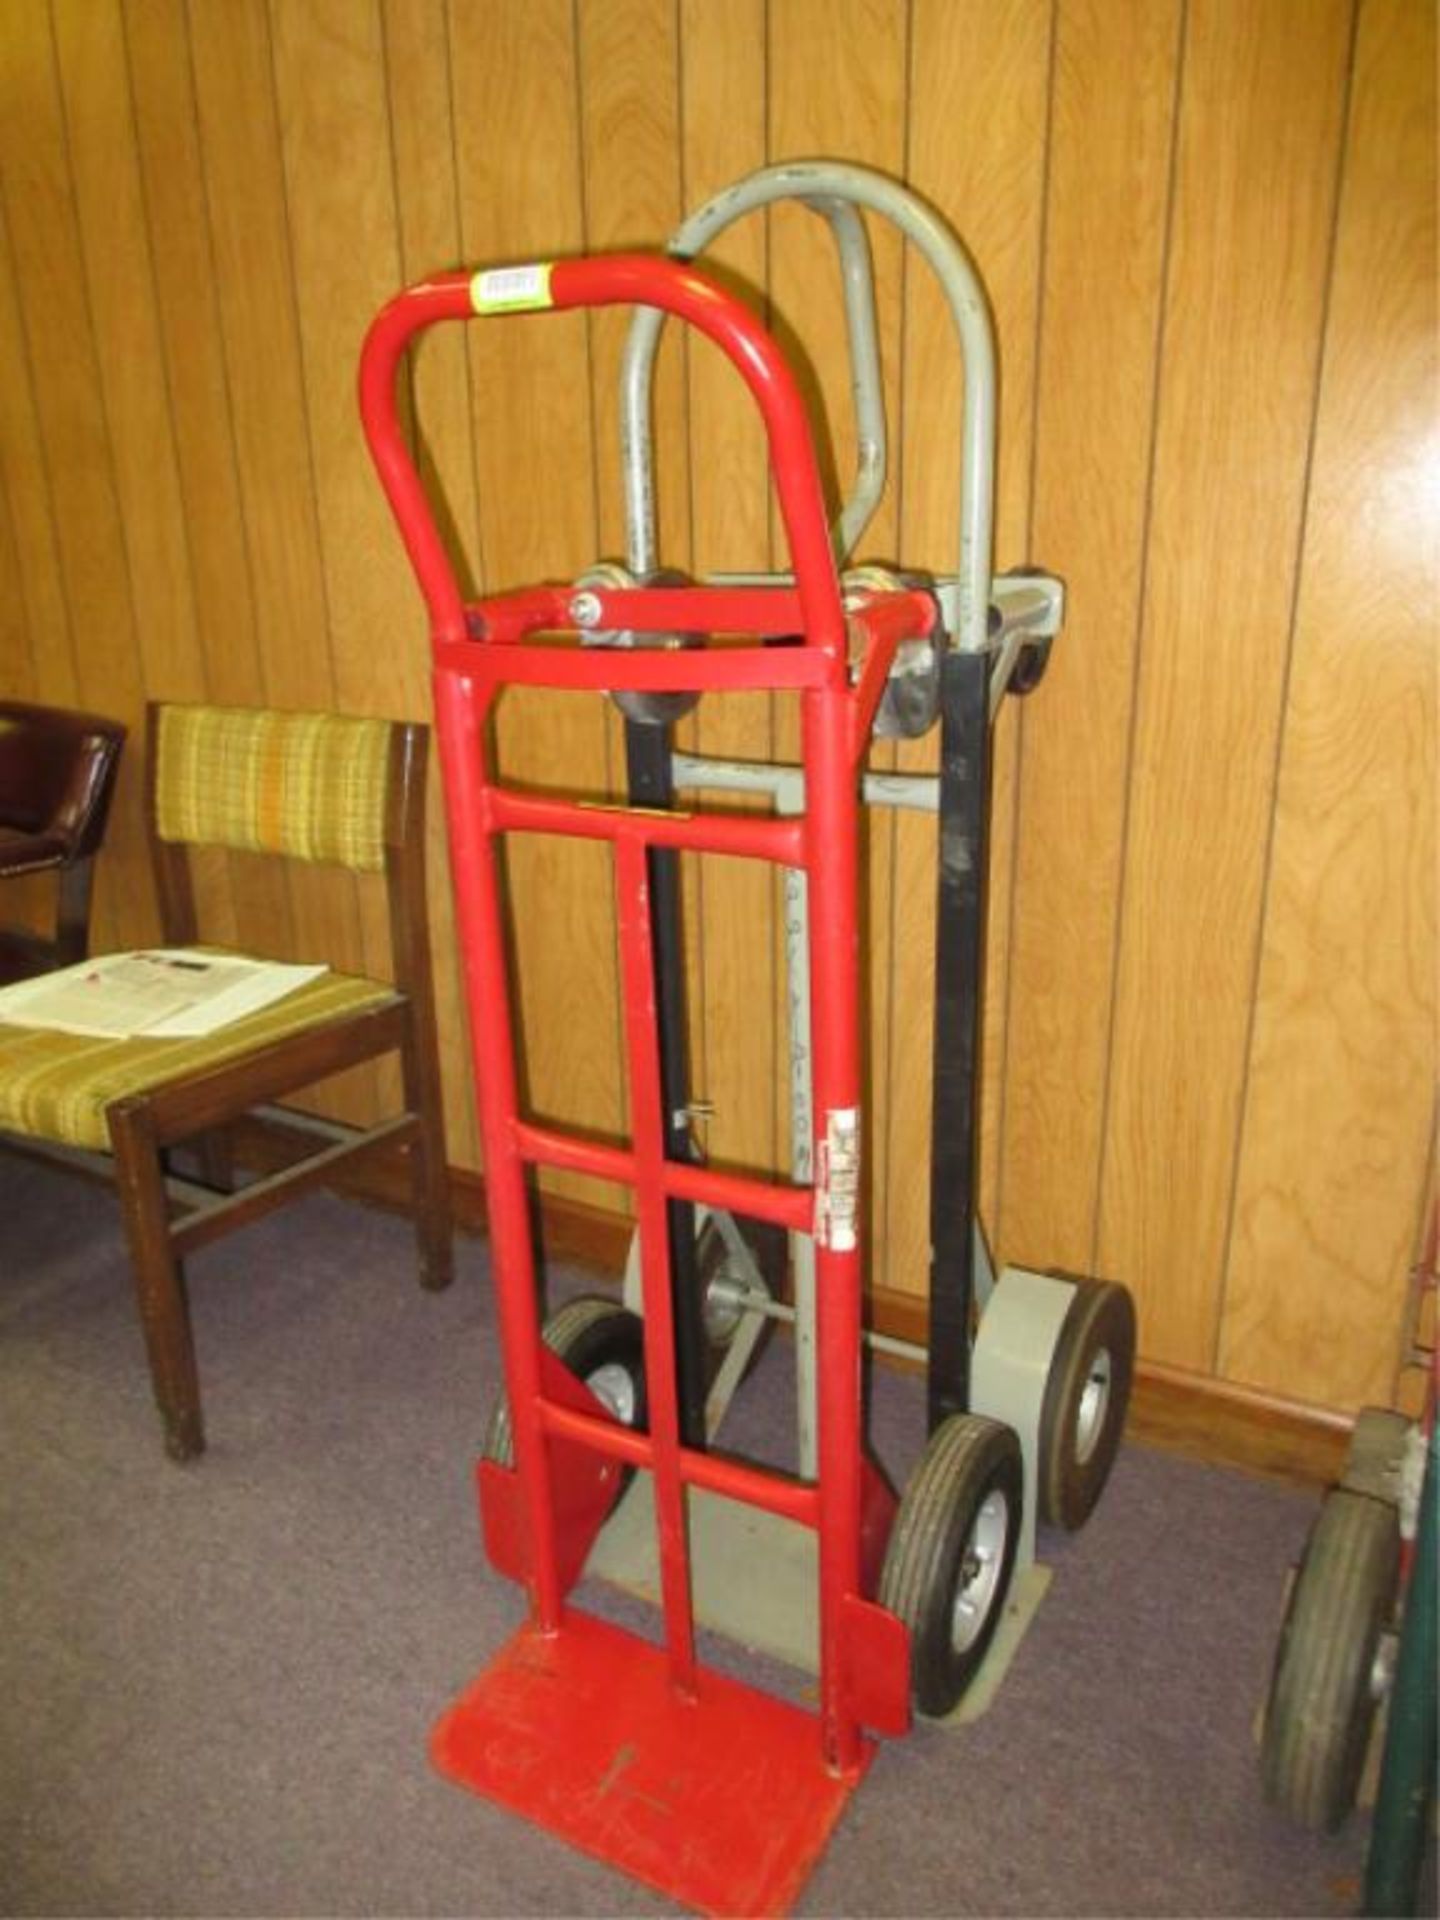 Lot of (2) 4-Wheel Hand Trucks. HIT# 2179453. conf. room. Asset Located at 10 Valley St, Pulaski,